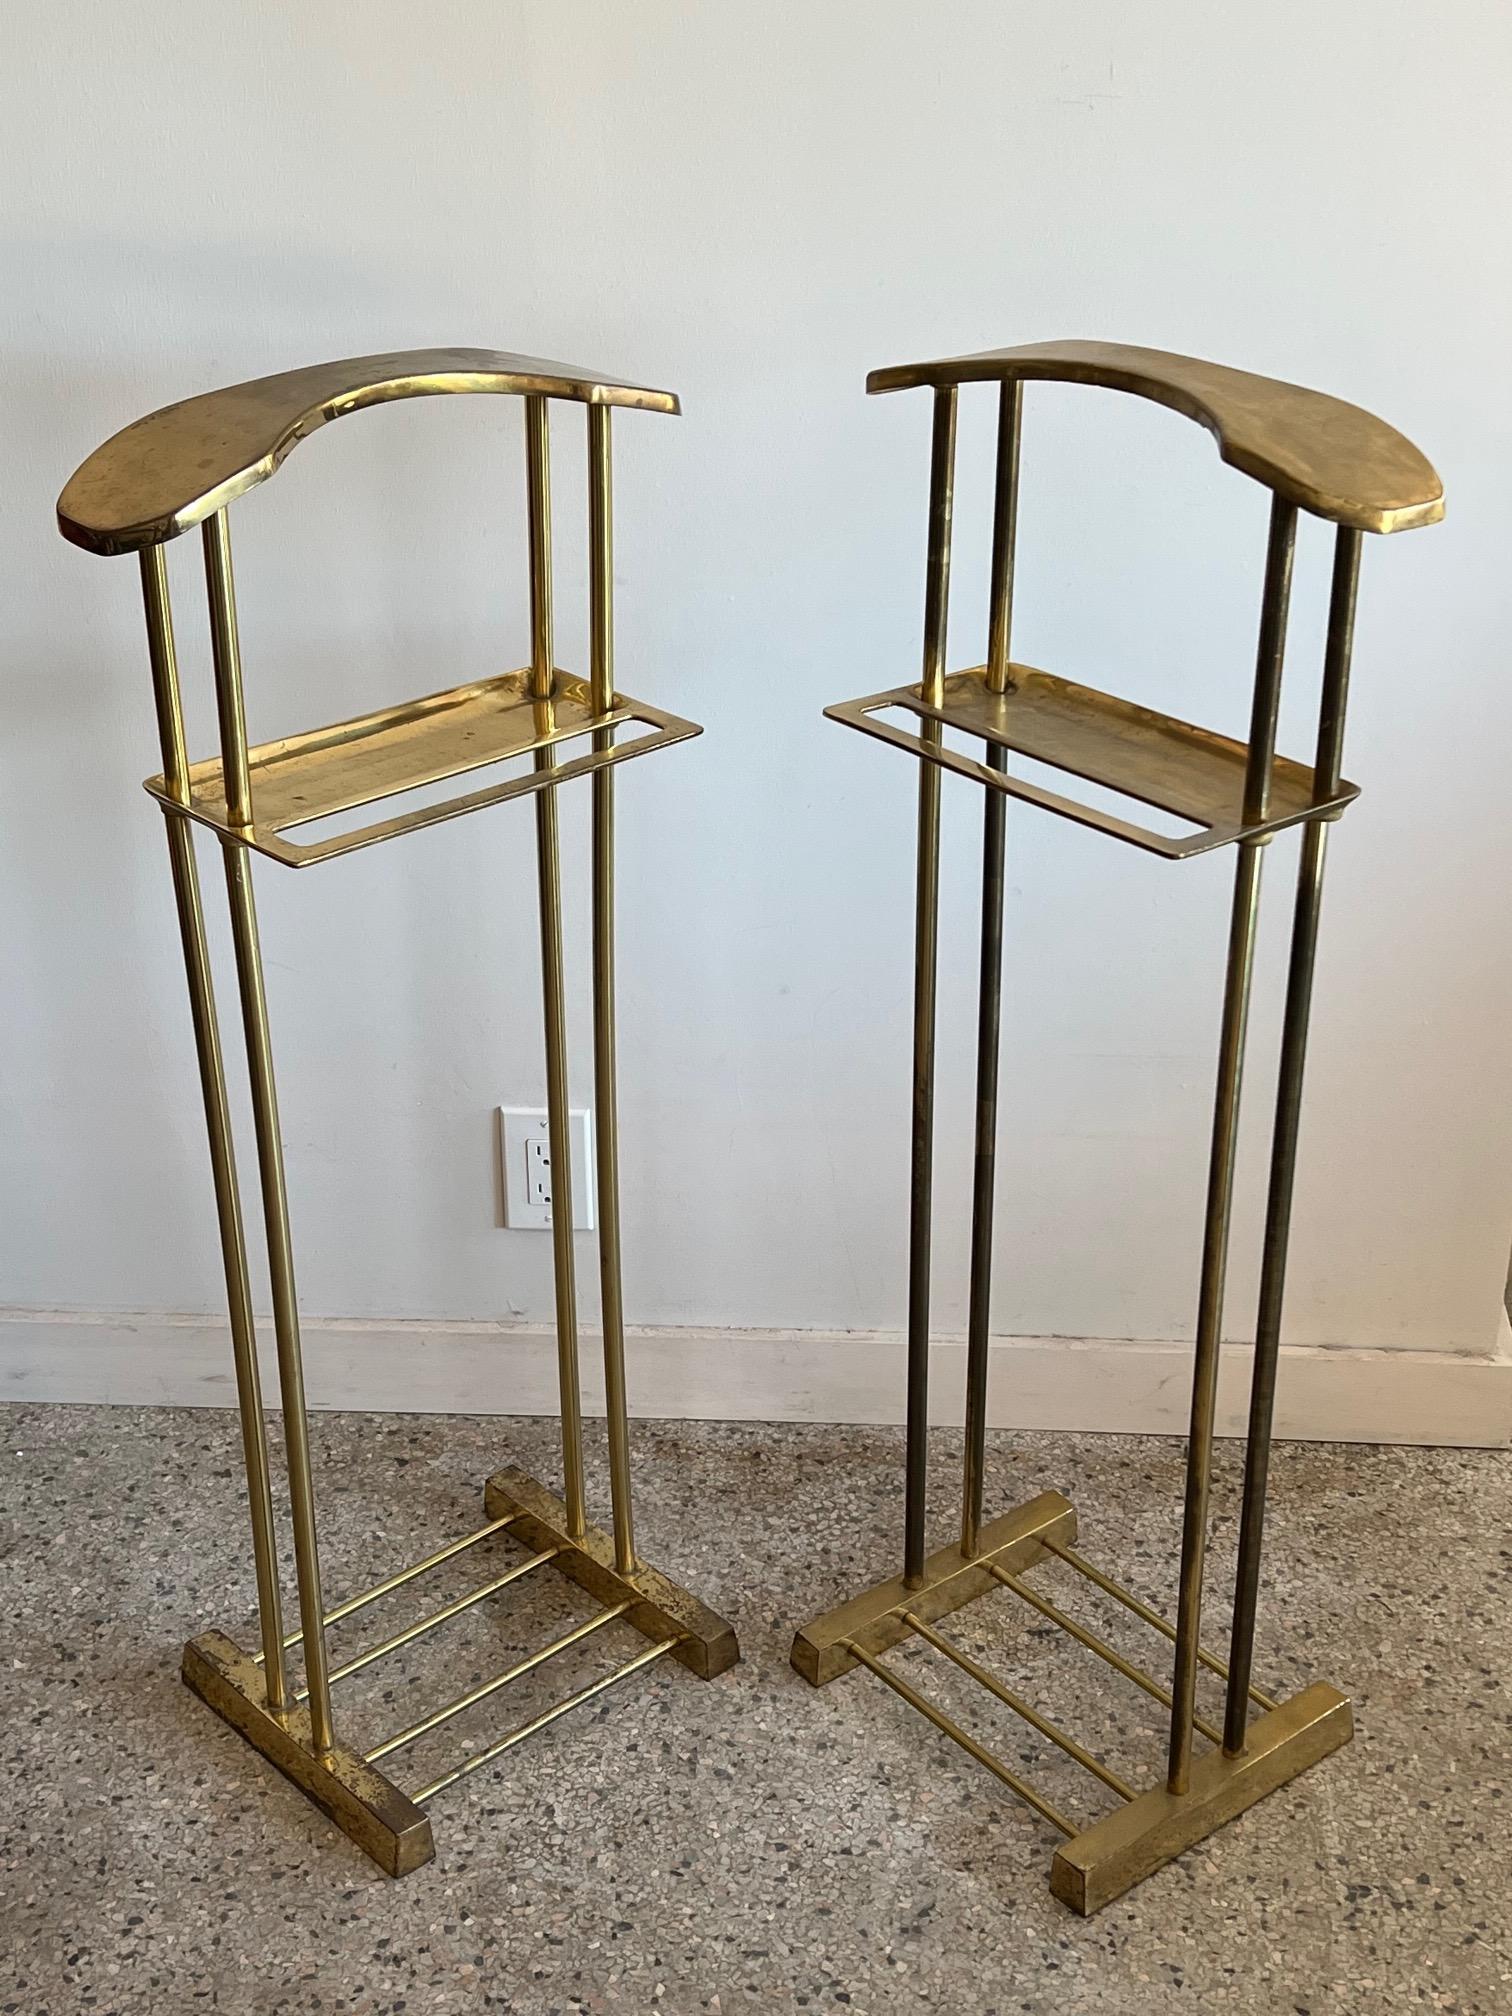 A pair of unusual brass valets, made in Taiwan ca' 1980's. Heavy construction with a clean modern style.